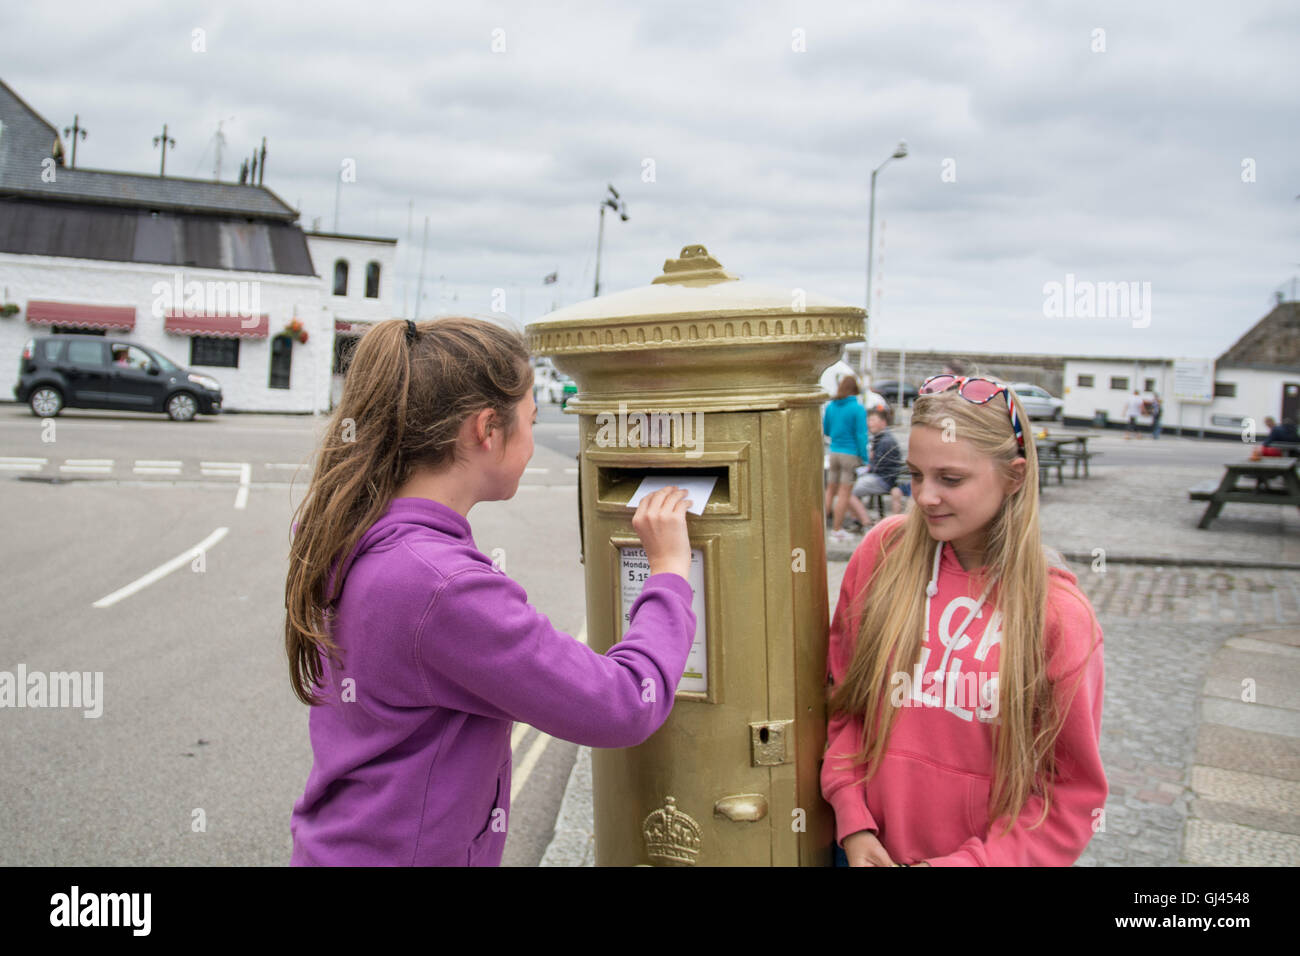 Penzance, Cornwall, UK. 12th August 2016.  The golden postbox in Penzance in honour of Helen Glover winning gold in the 2012 Olympics. Helen is due to race in the Coxless pairs with Heather Stanning at Rio, and are going for gold again ! Seen here Kitty and Lana Credit:  Simon Maycock/Alamy Live News Stock Photo